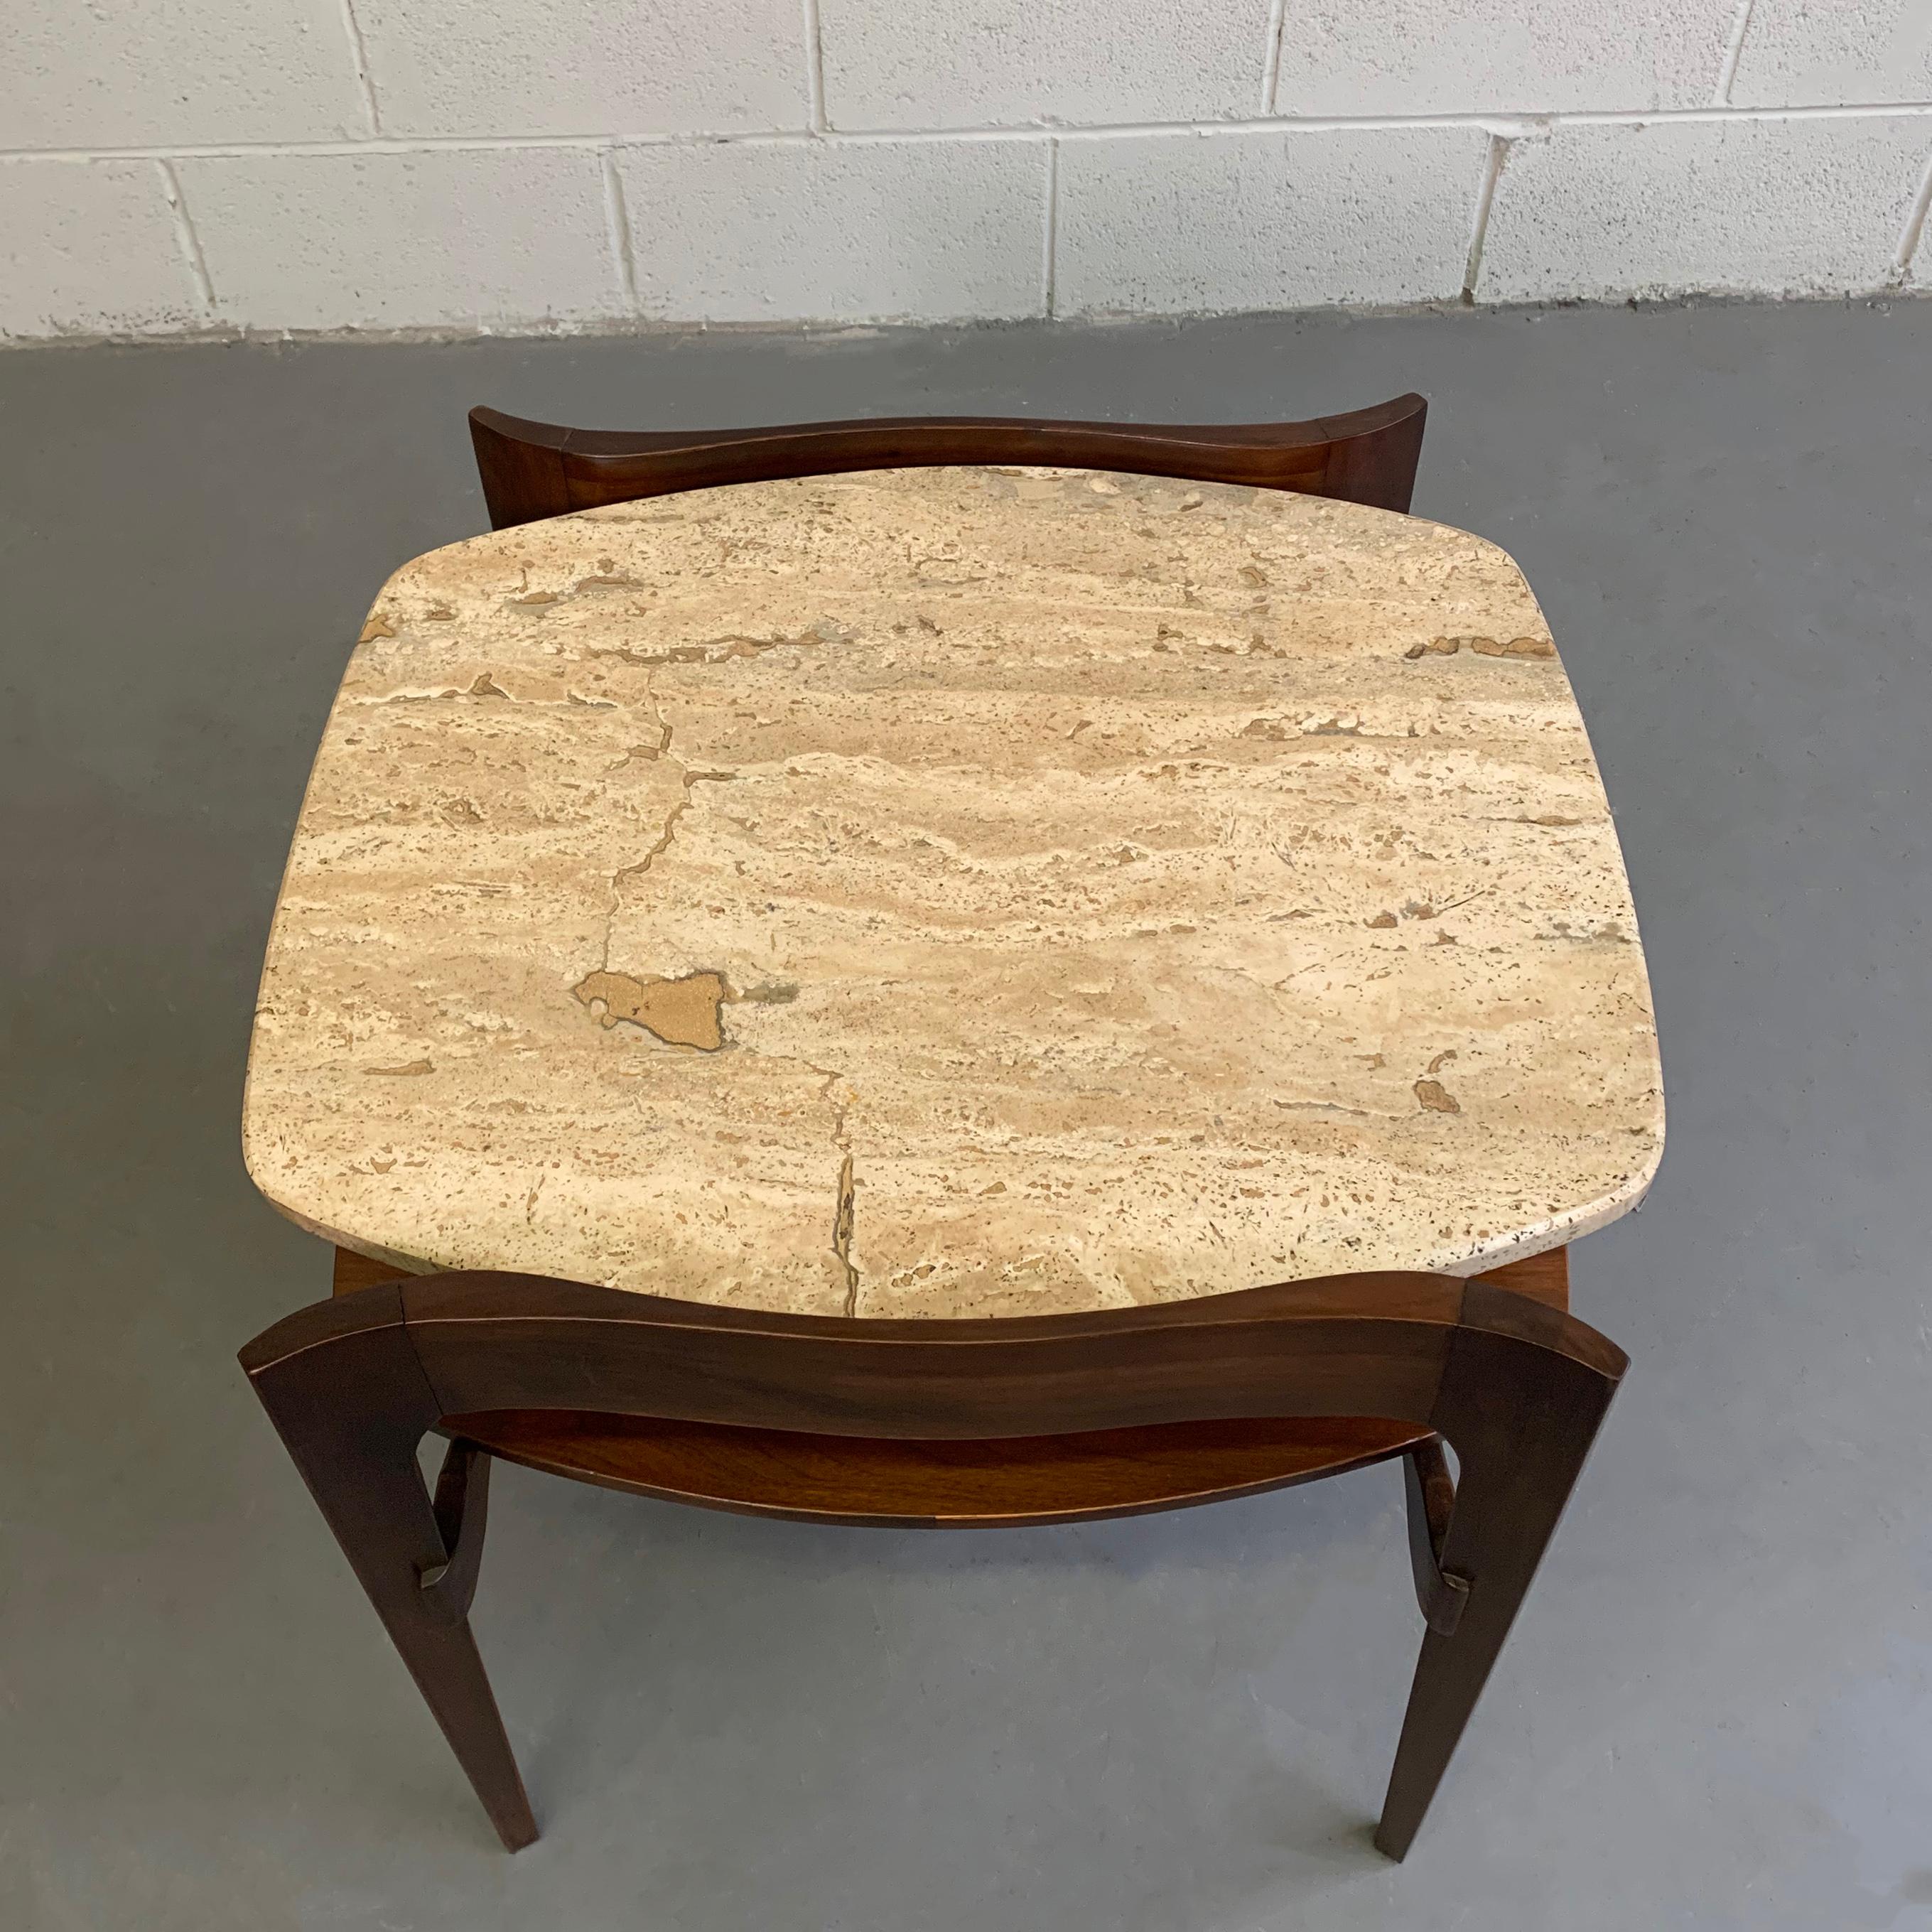 20th Century Travertine and Walnut Side Table by Bertha Schaefer